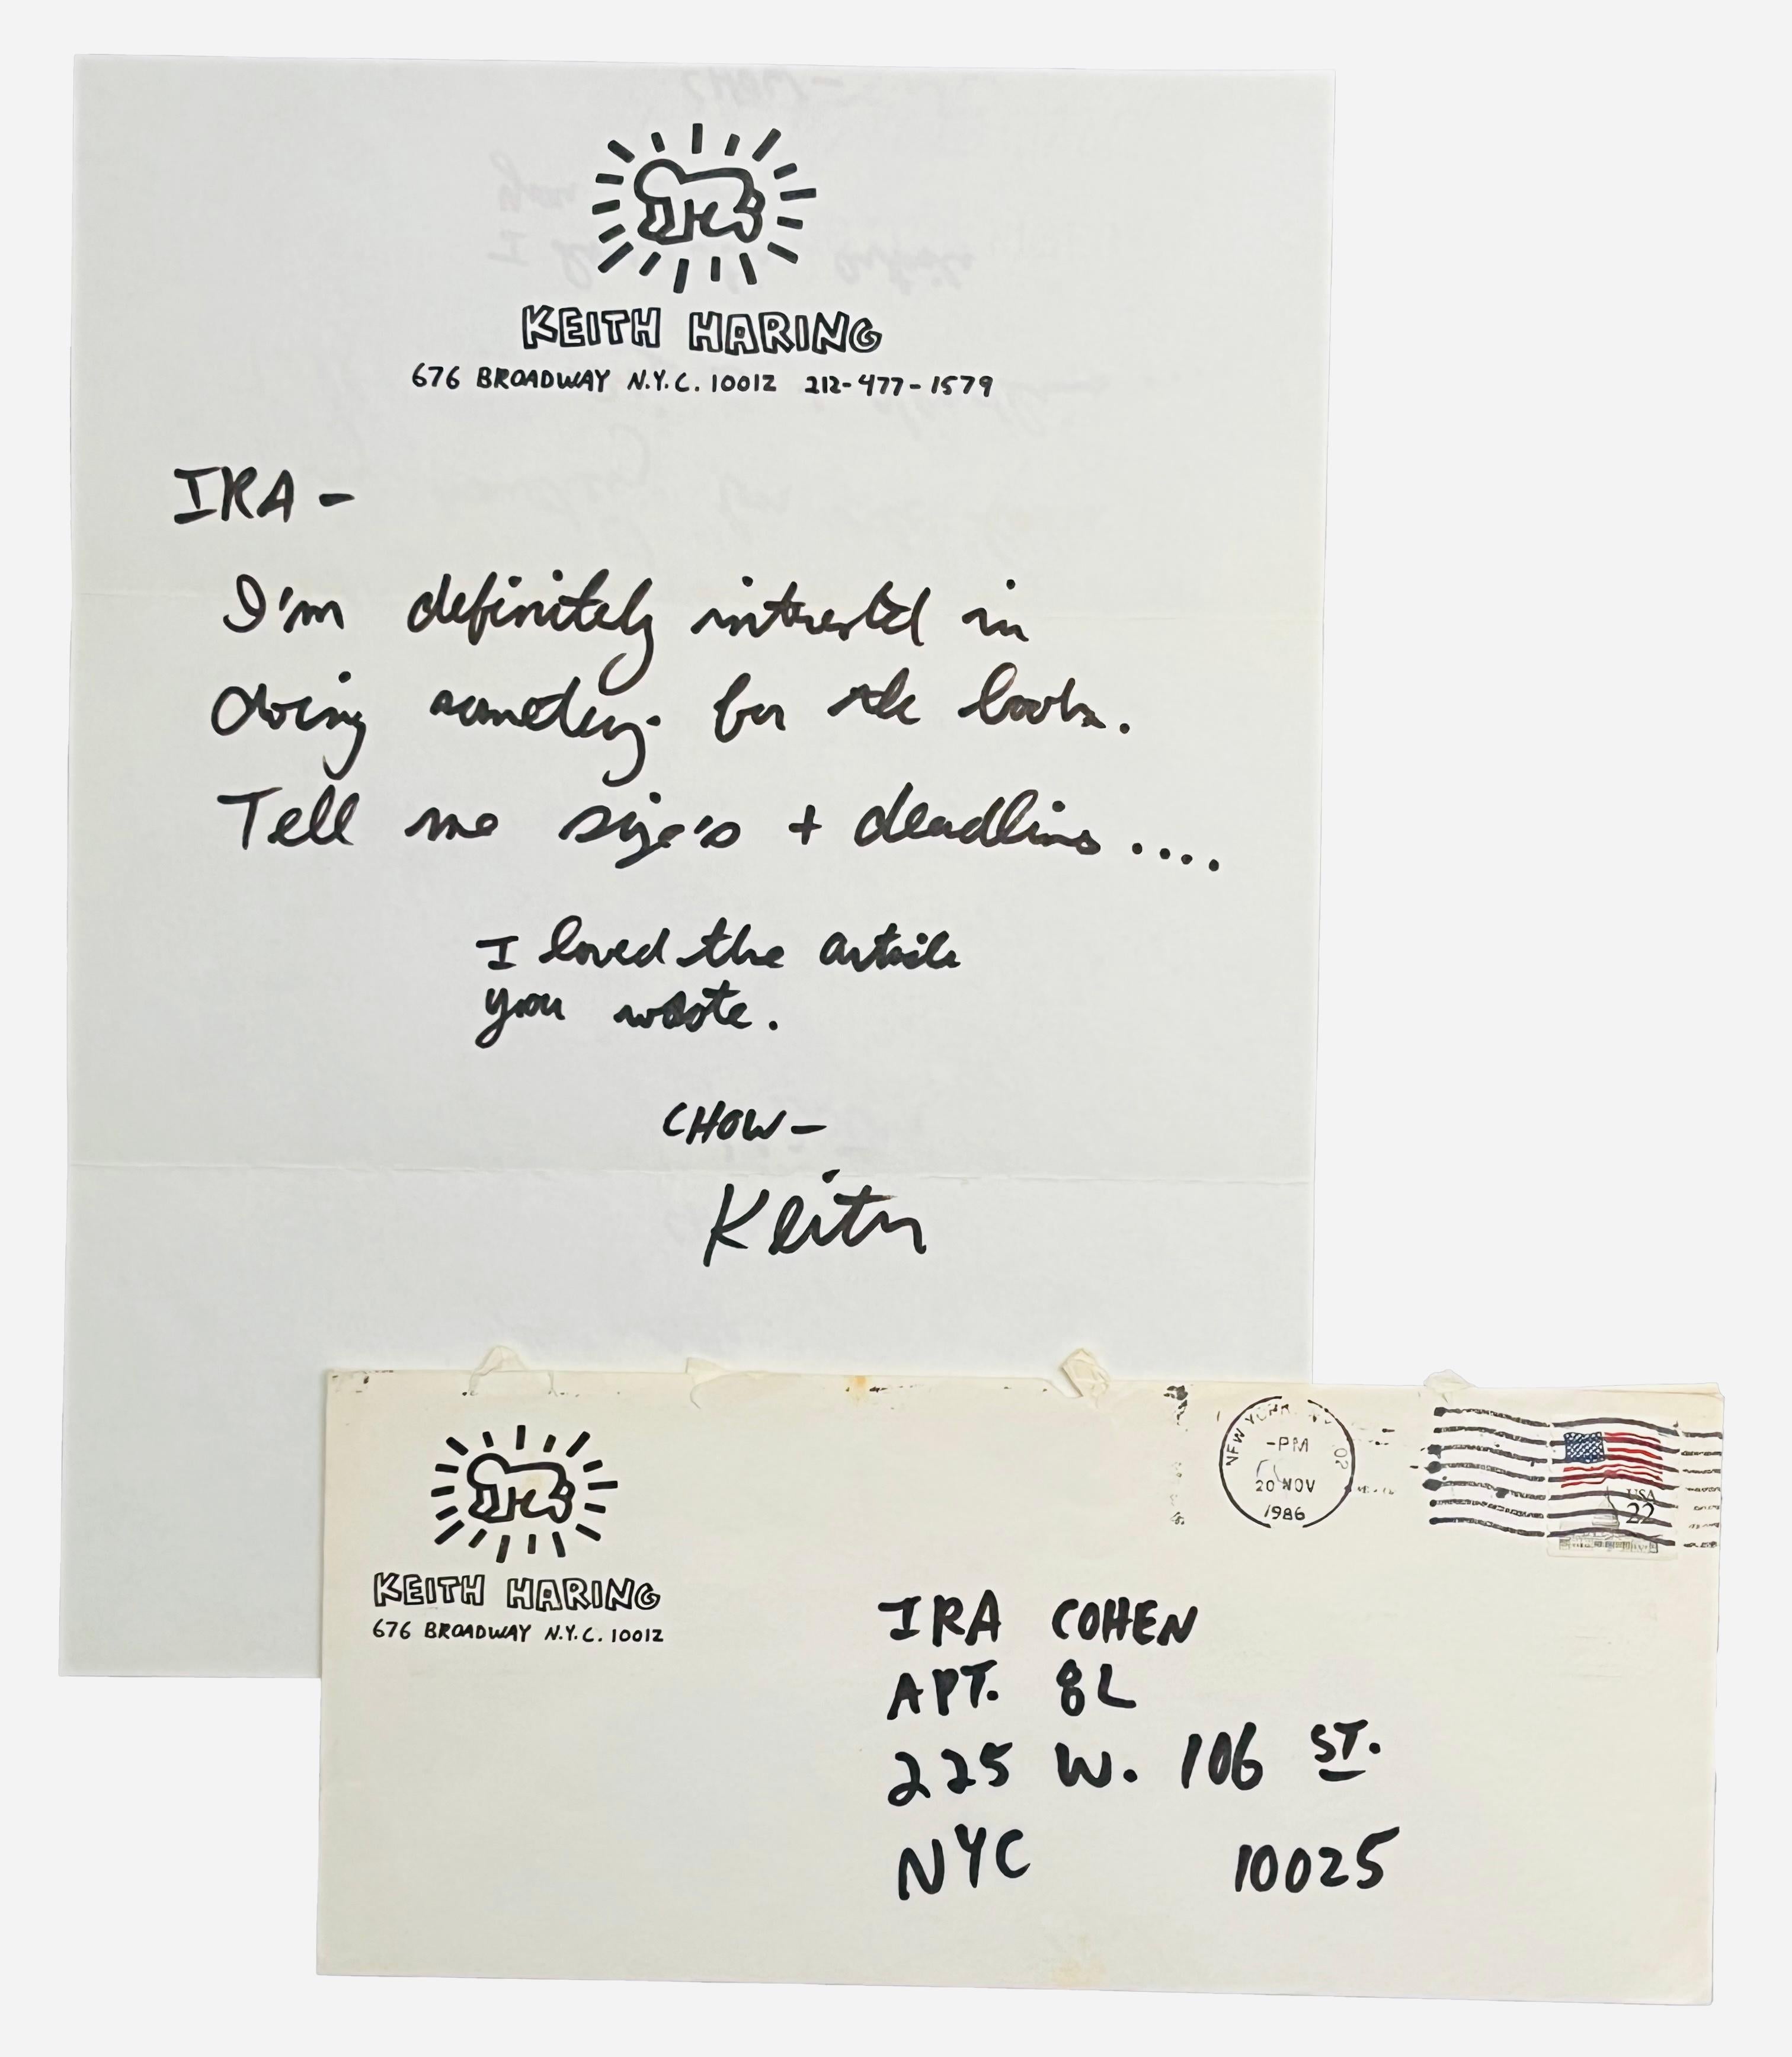 Keith Haring handwritten letter 1986:
A rare 1980’s handwritten letter by Keith Haring executed on the artist's personal stationary. A personal response by Haring to a New York based editor named Ira Cohen. Endearingly signed, ‘Chow Keith’ to the